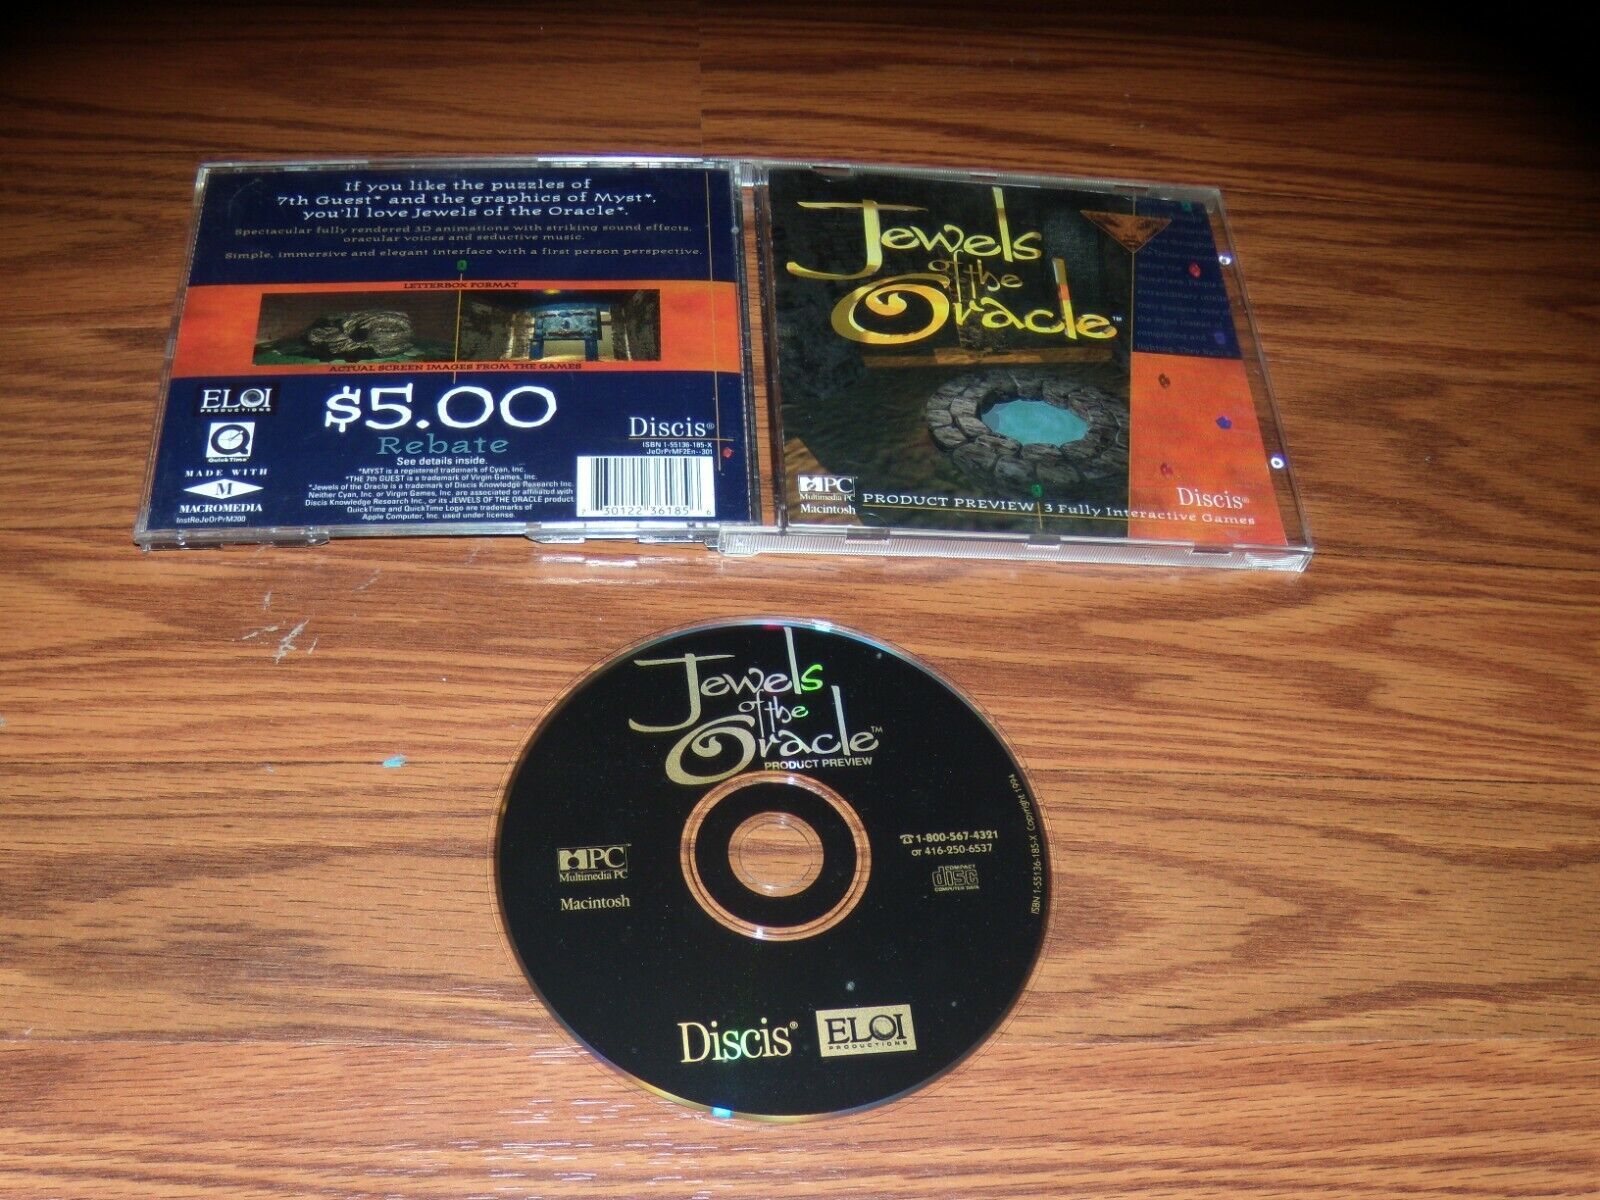 Jewels of the Oracle Product Preview for the Mac- Near Mint CD-ROM